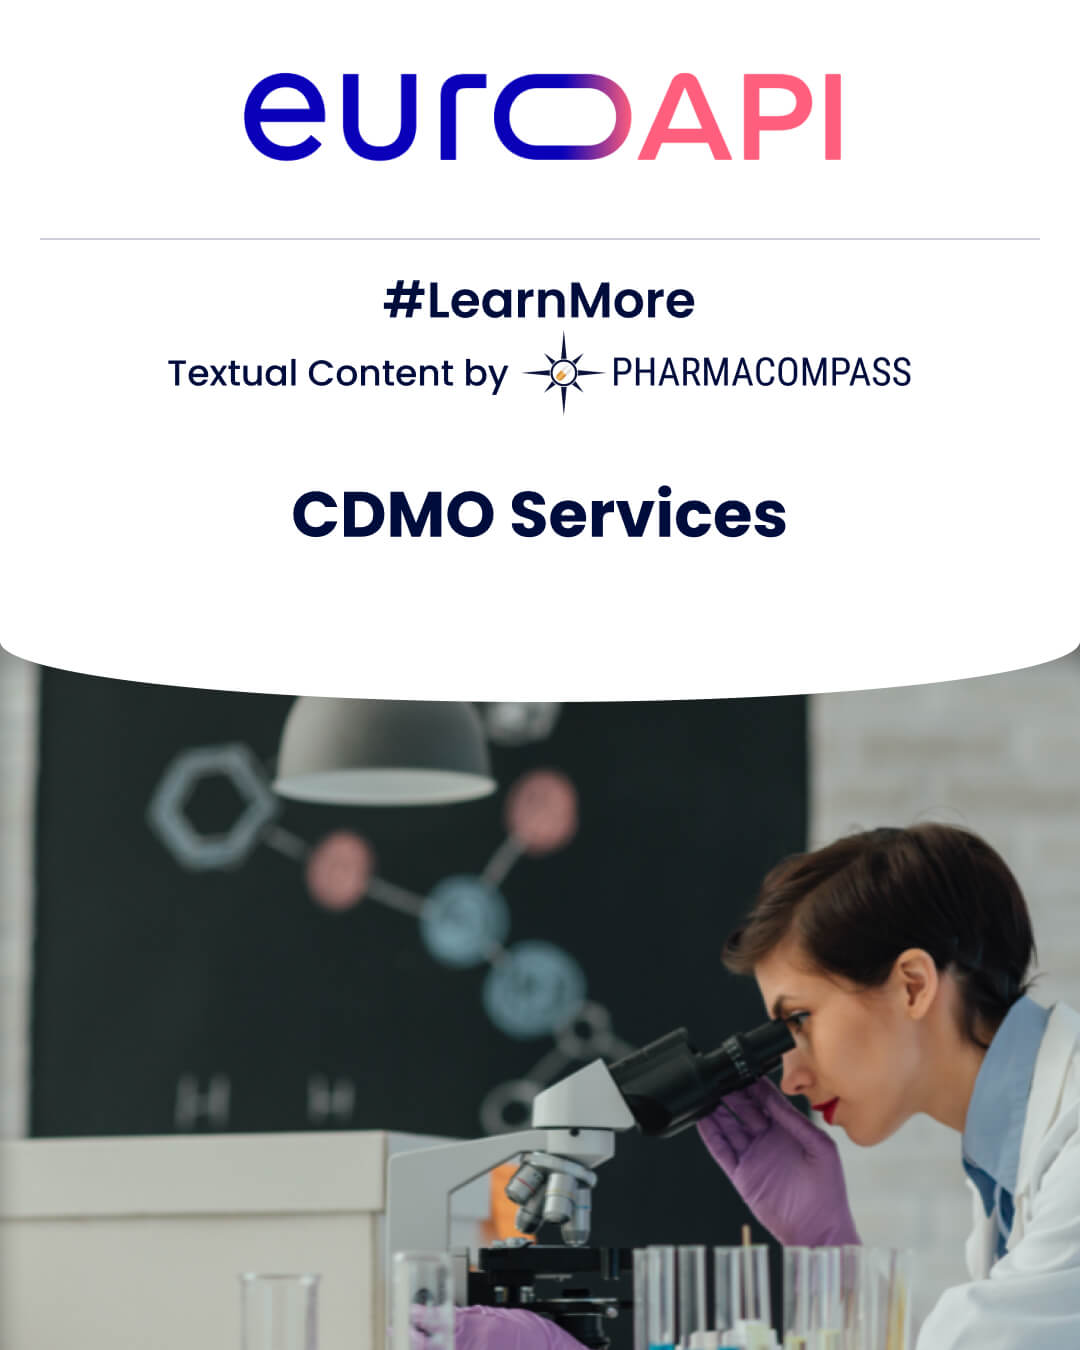 Overview of CDMO Services of EUROAPI, such as small molecule APIs, peptides, microbial fermentation, micronization & spray drying on PharmaCompass.